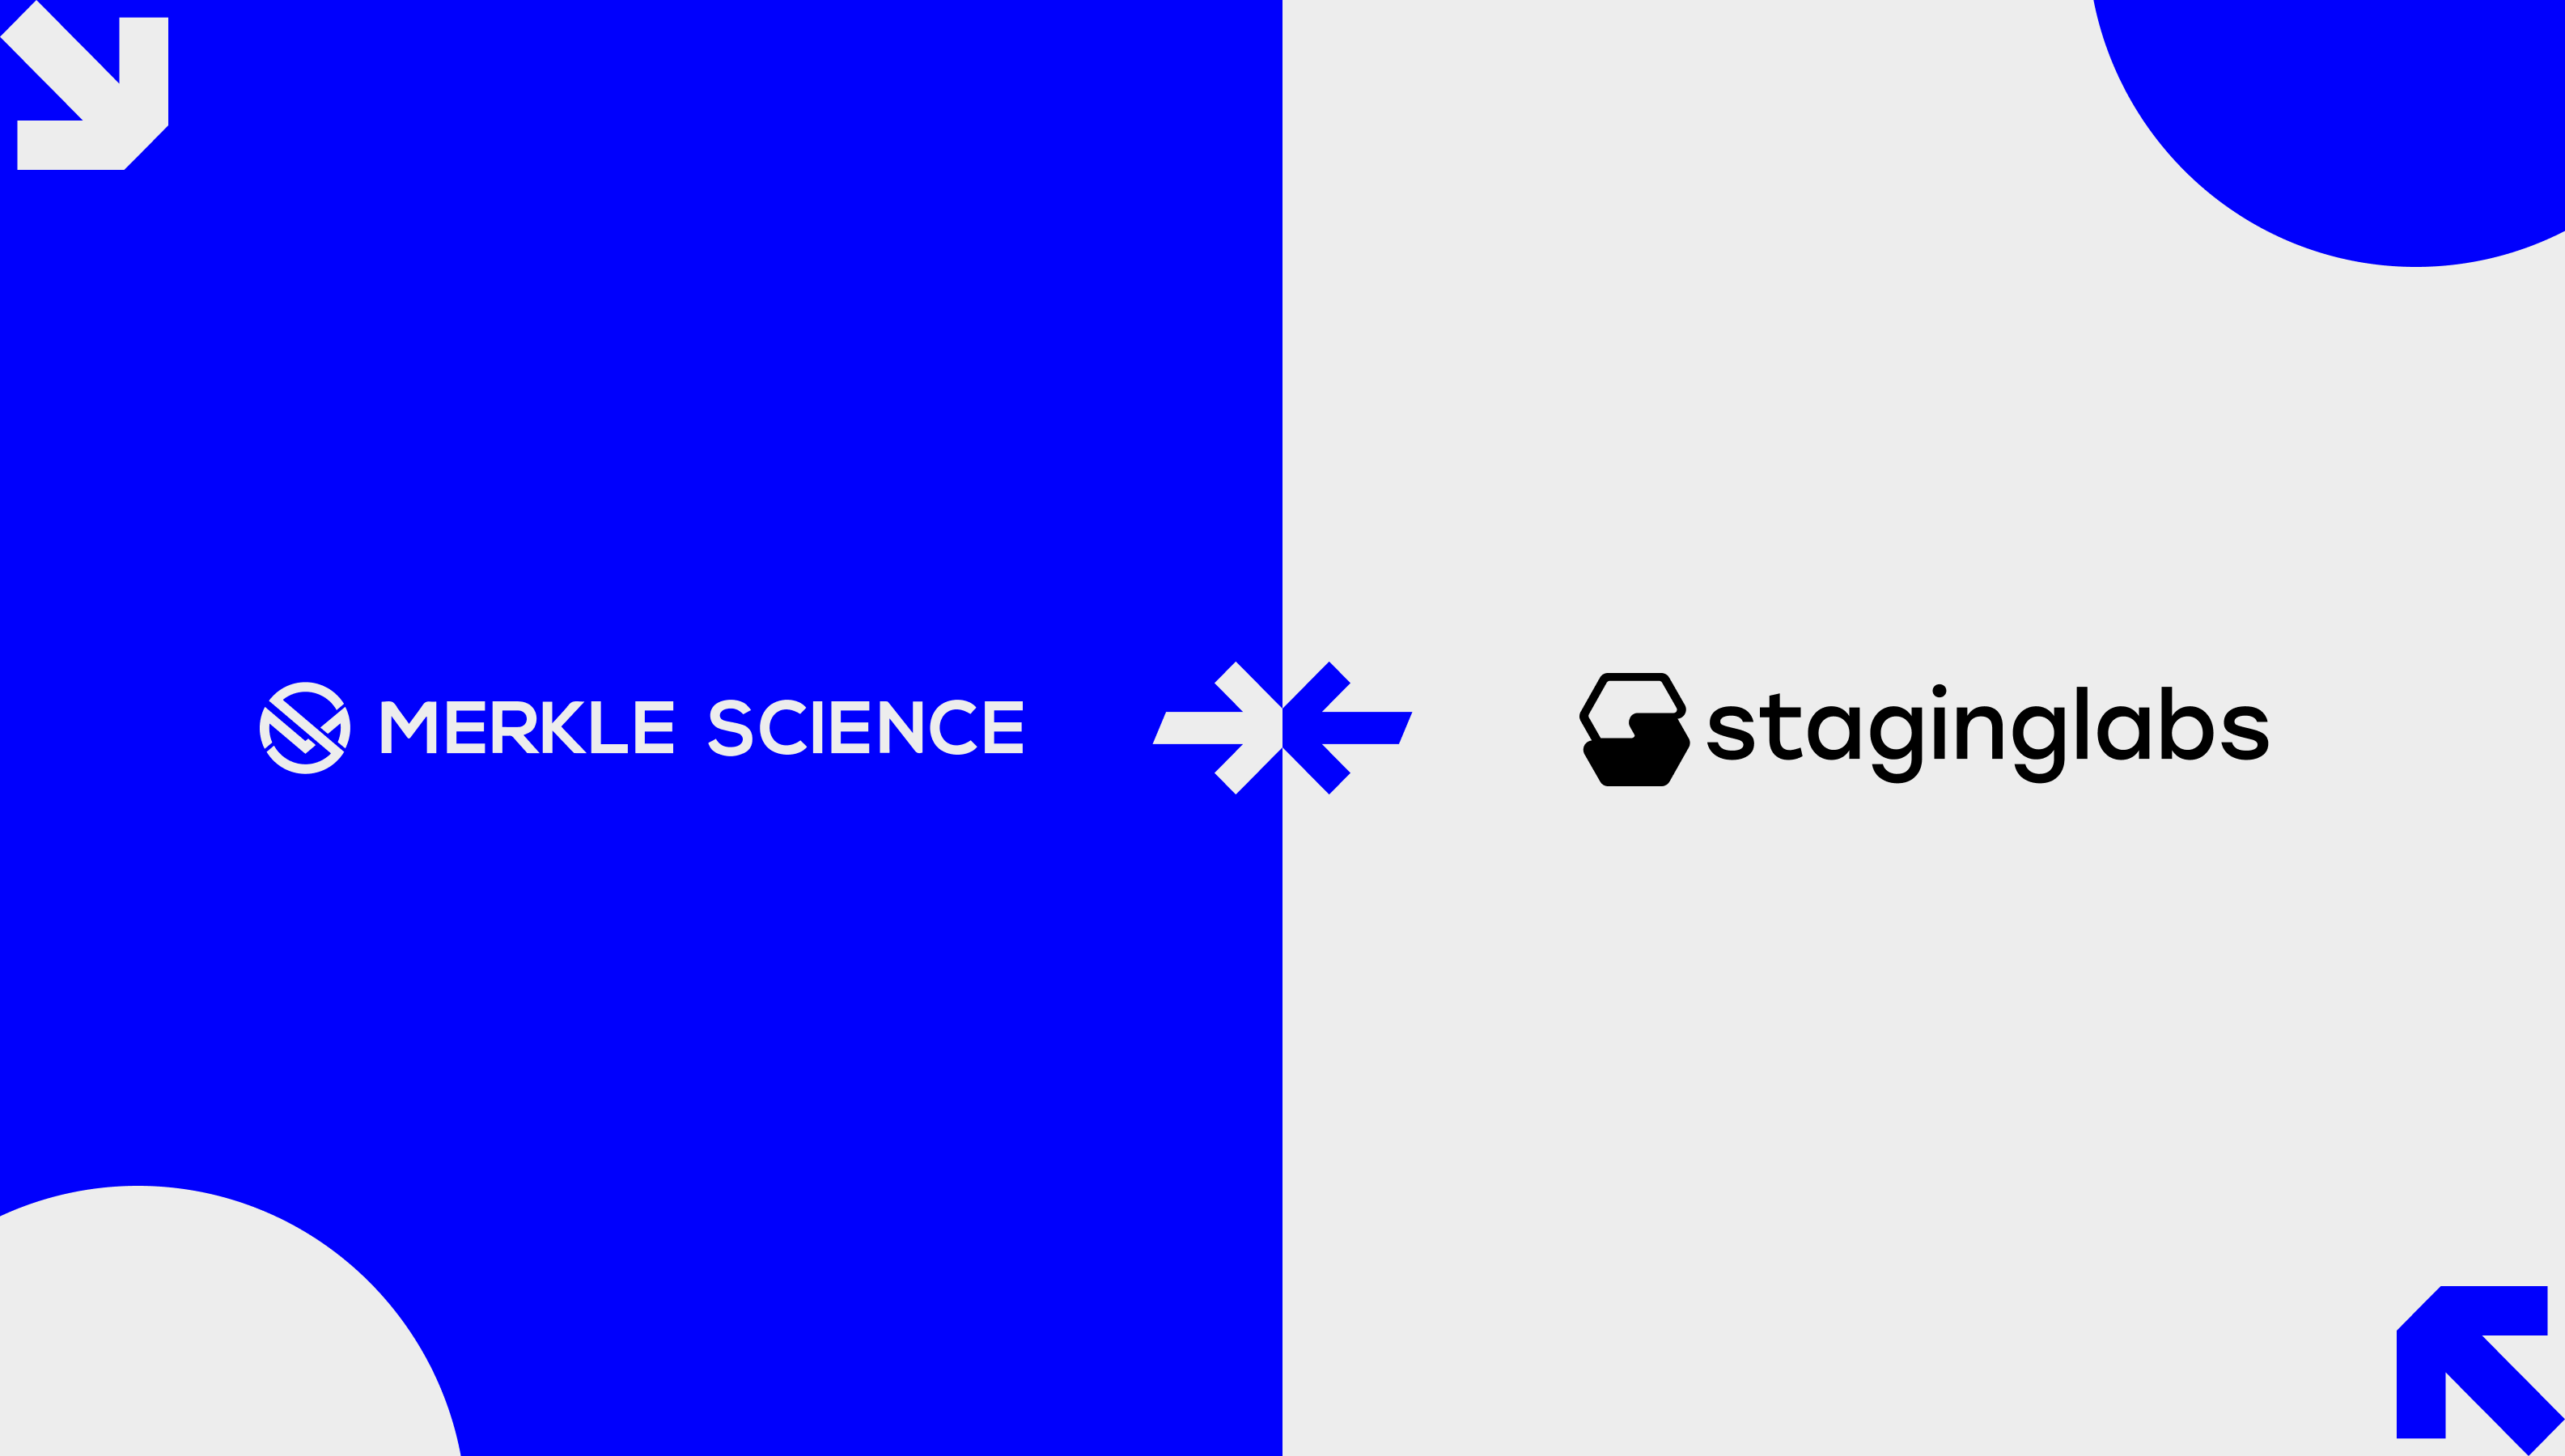 Merkle Science acquires Staging Labs